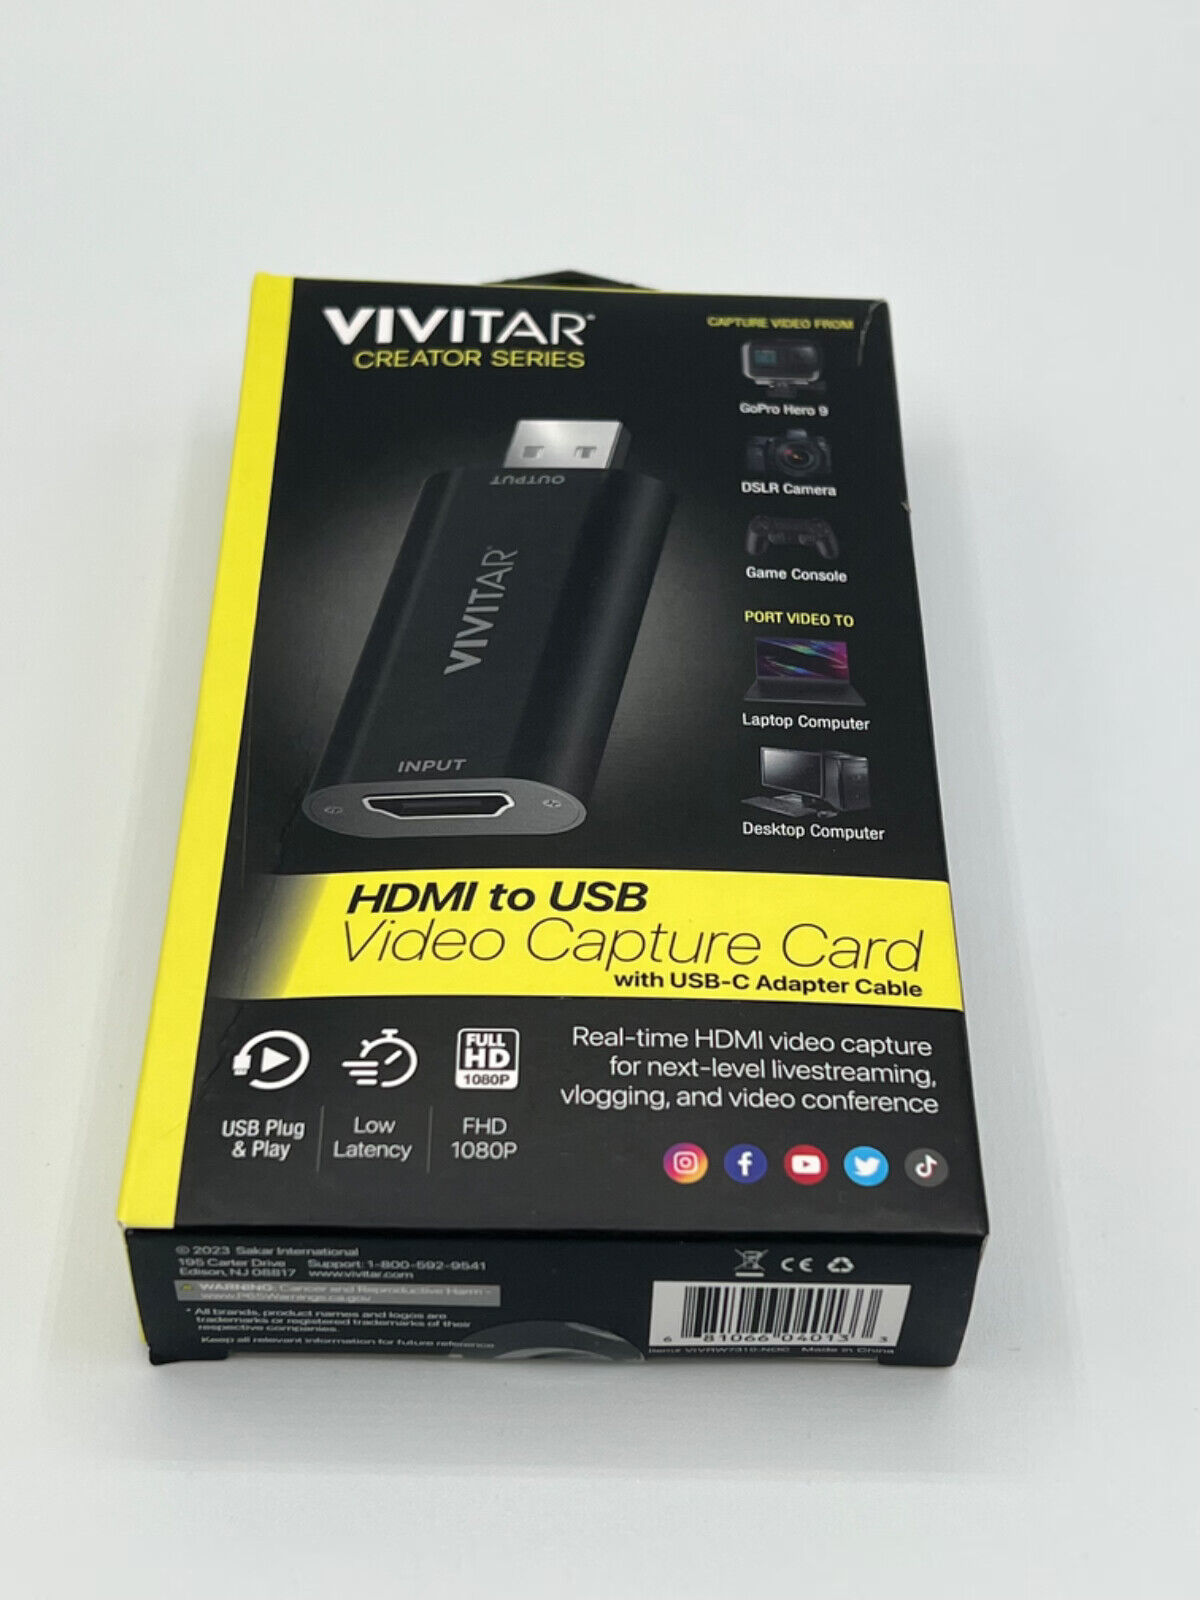 Vivitar Creator Series HDMI to USB Video Capture Card with Real-time HDMI V1